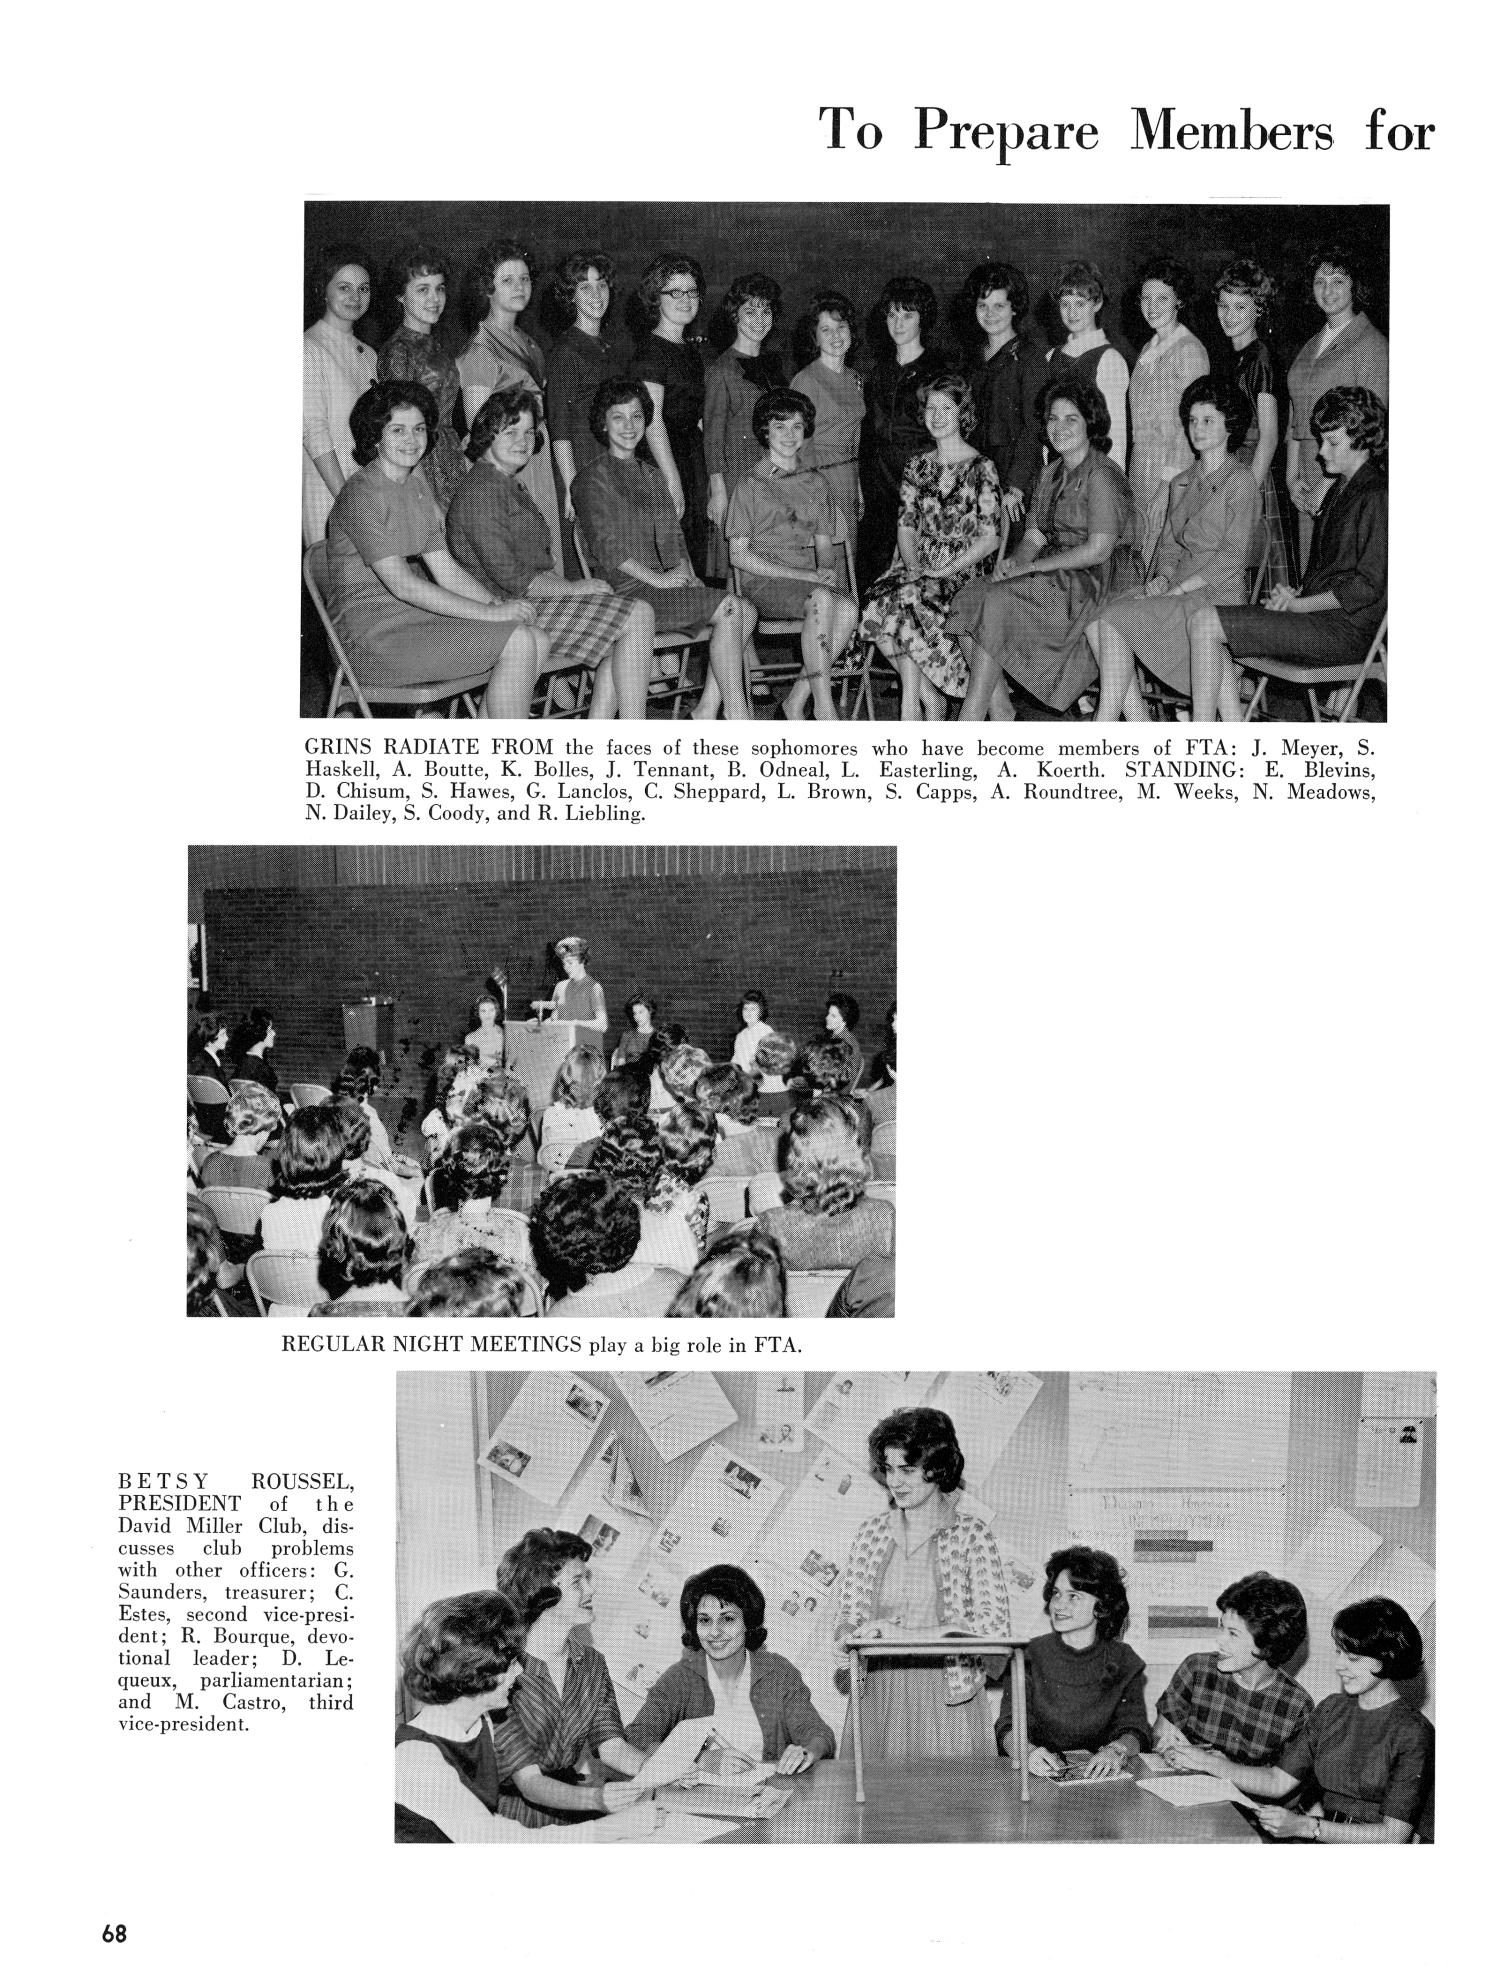 The Yellow Jacket, Yearbook of Thomas Jefferson High School, 1963
                                                
                                                    68
                                                